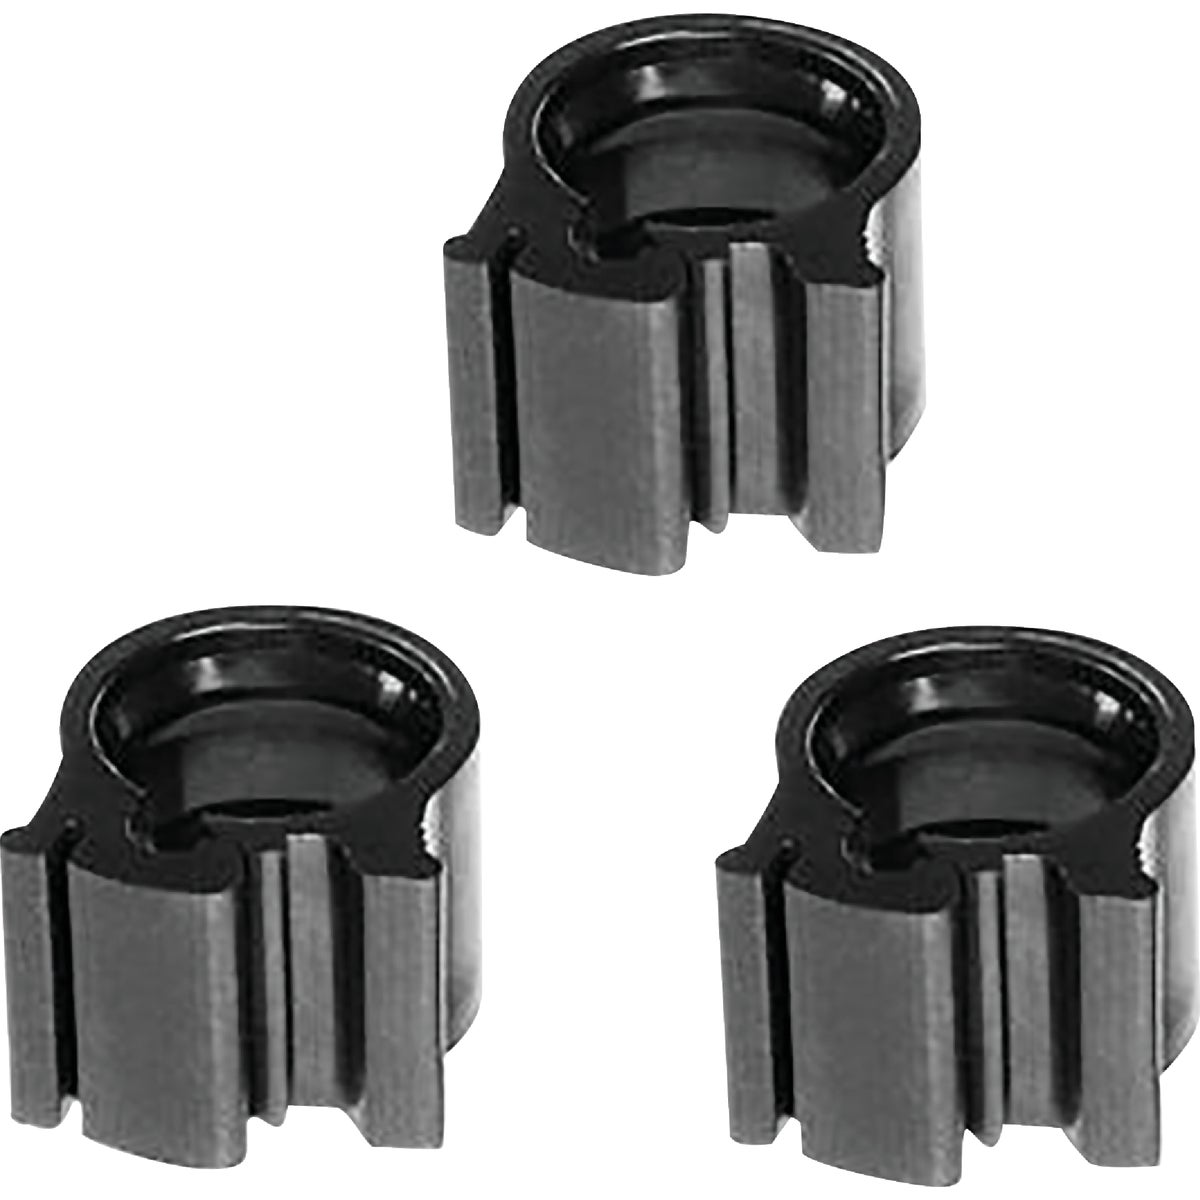 Flair-It PEXLock 1/2 In. Poly-Alloy Compression PEX Crimp Ring (3-Pack)